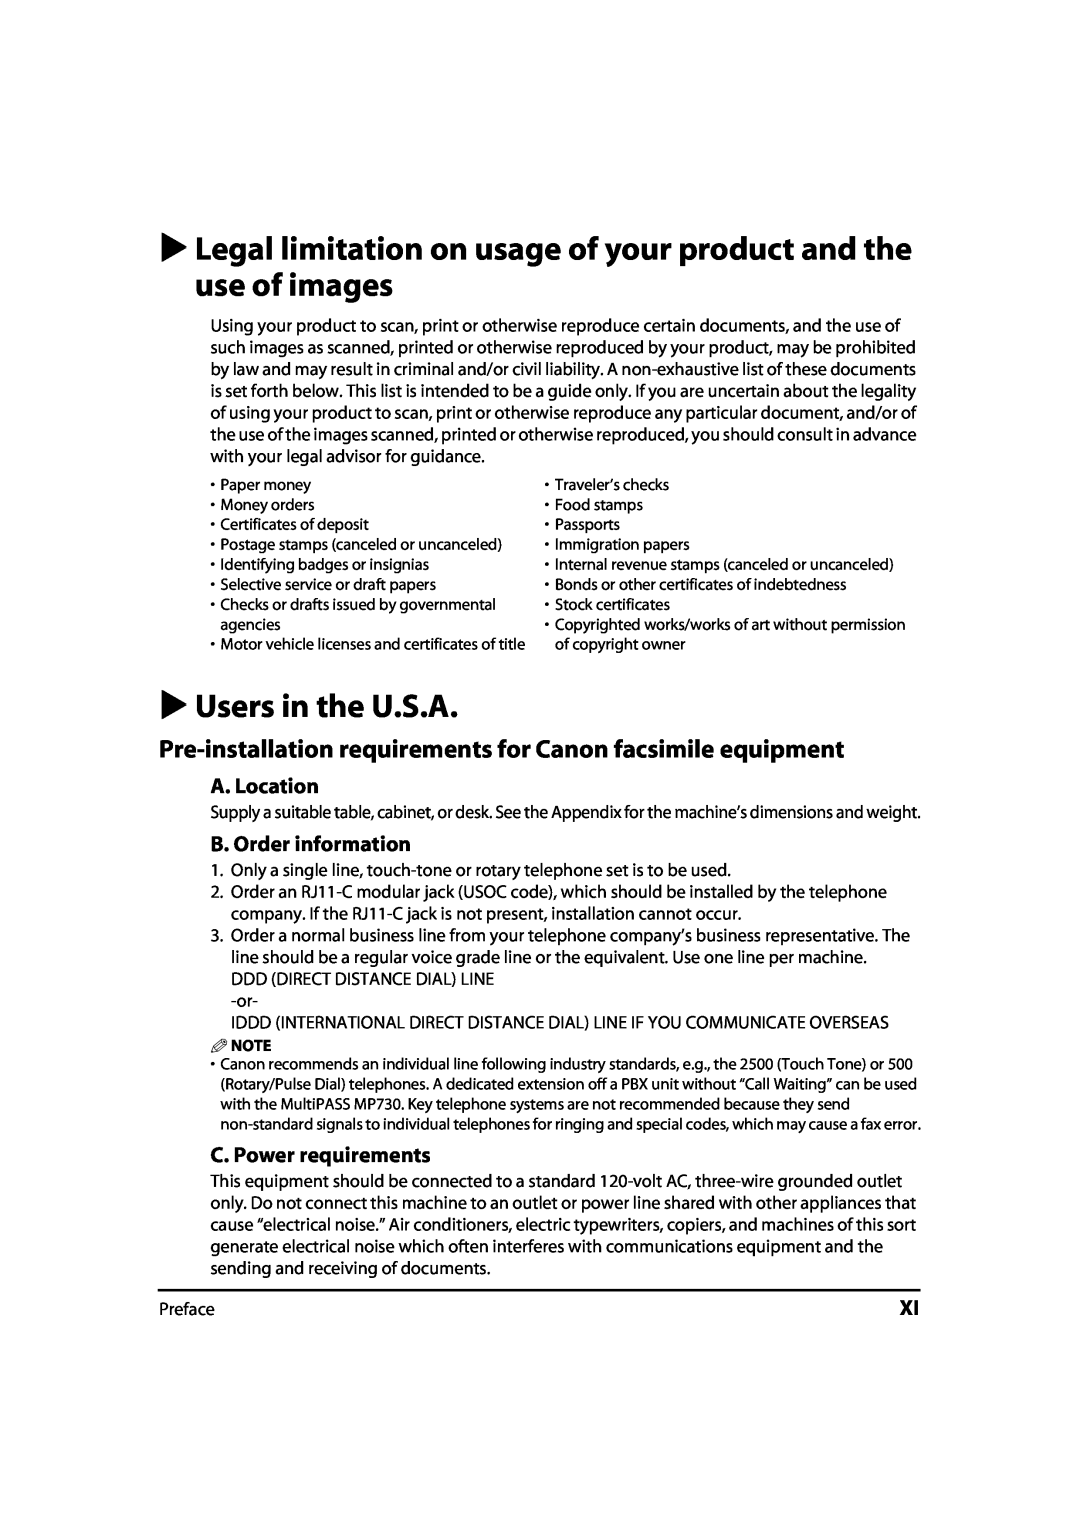 Canon 730i, MP700 manual Legal limitation on usage of your product and the use of images, Users in the U.S.A, A. Location 